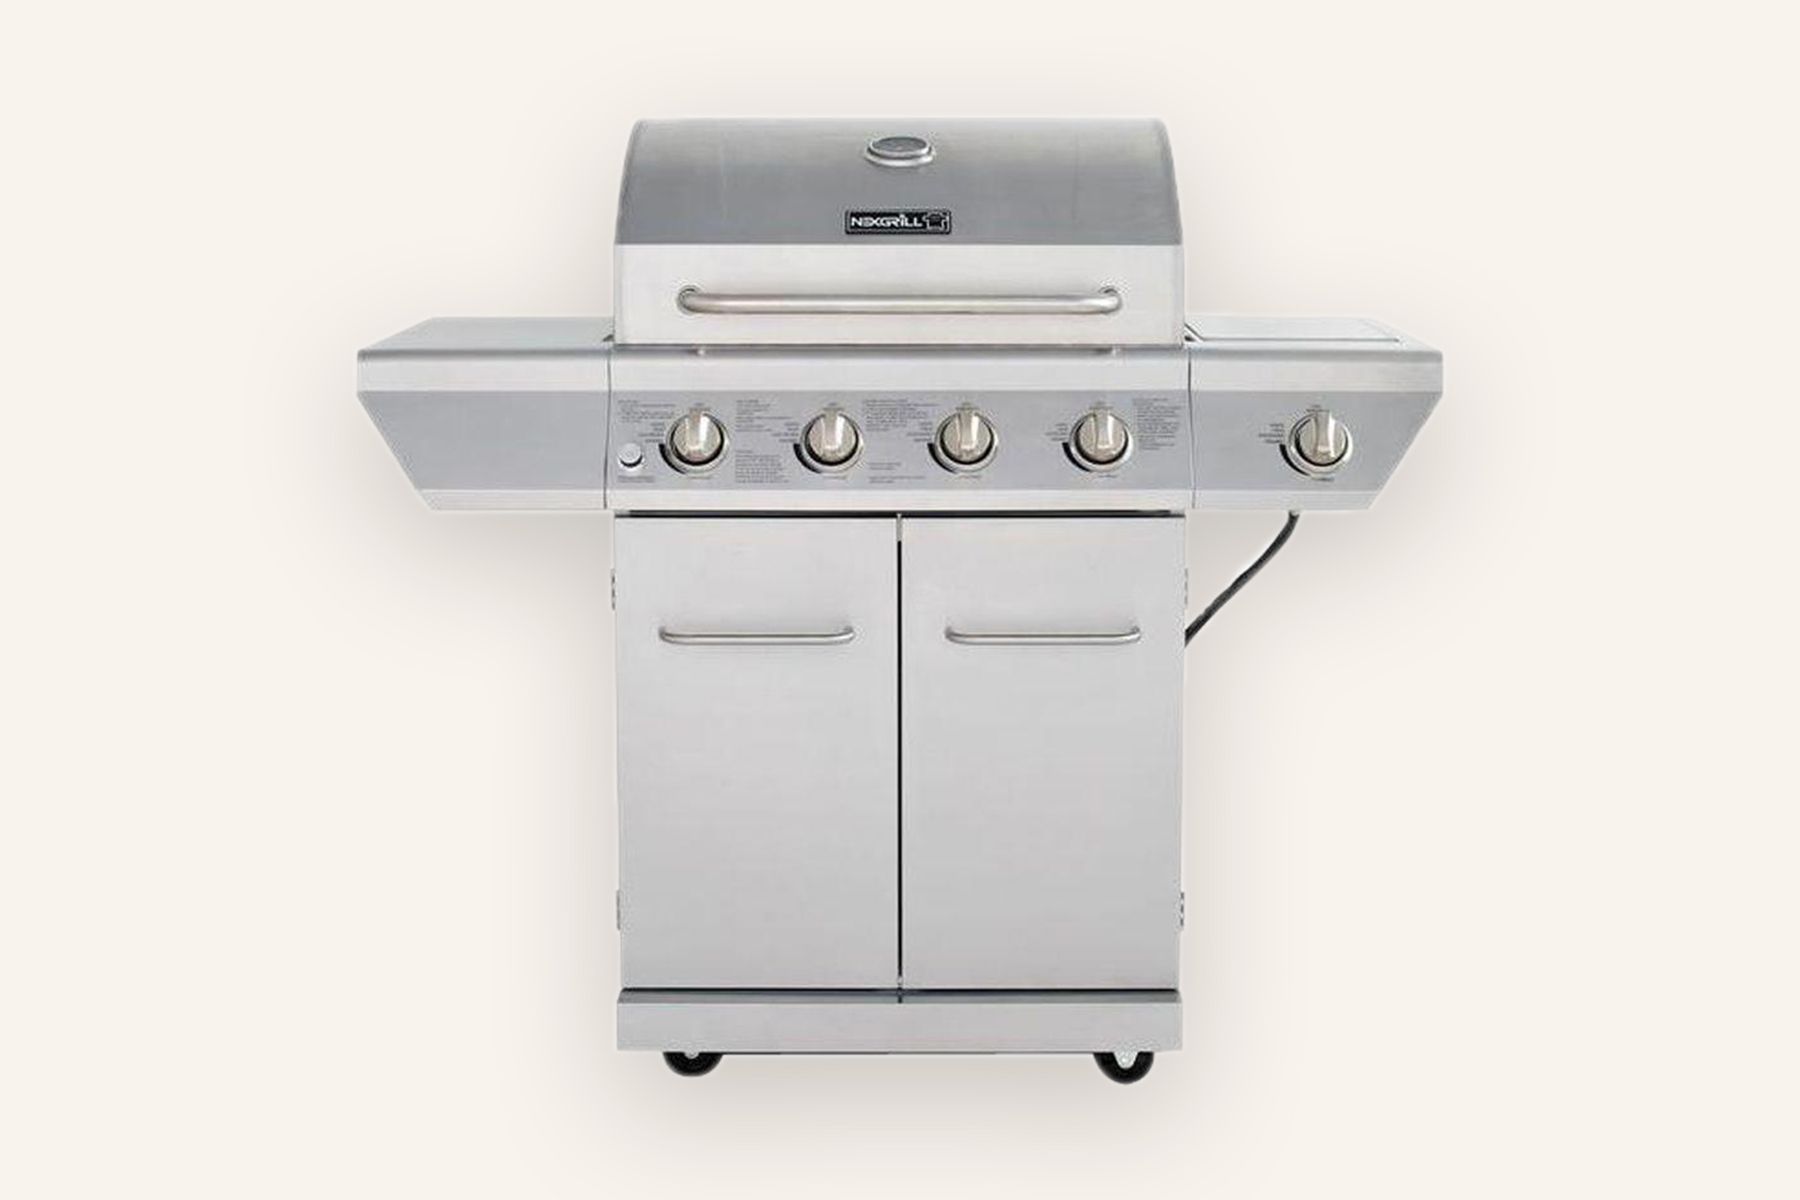 https://s42814.pcdn.co/wp-content/uploads/2020/06/Nexgrill_4_Burner_Propane_Gas_Grill_in_Stainless_Steel_with_Side_Burner_and_Stainless_Steel_Doors_4thJul_2020.jpg.optimal.jpg